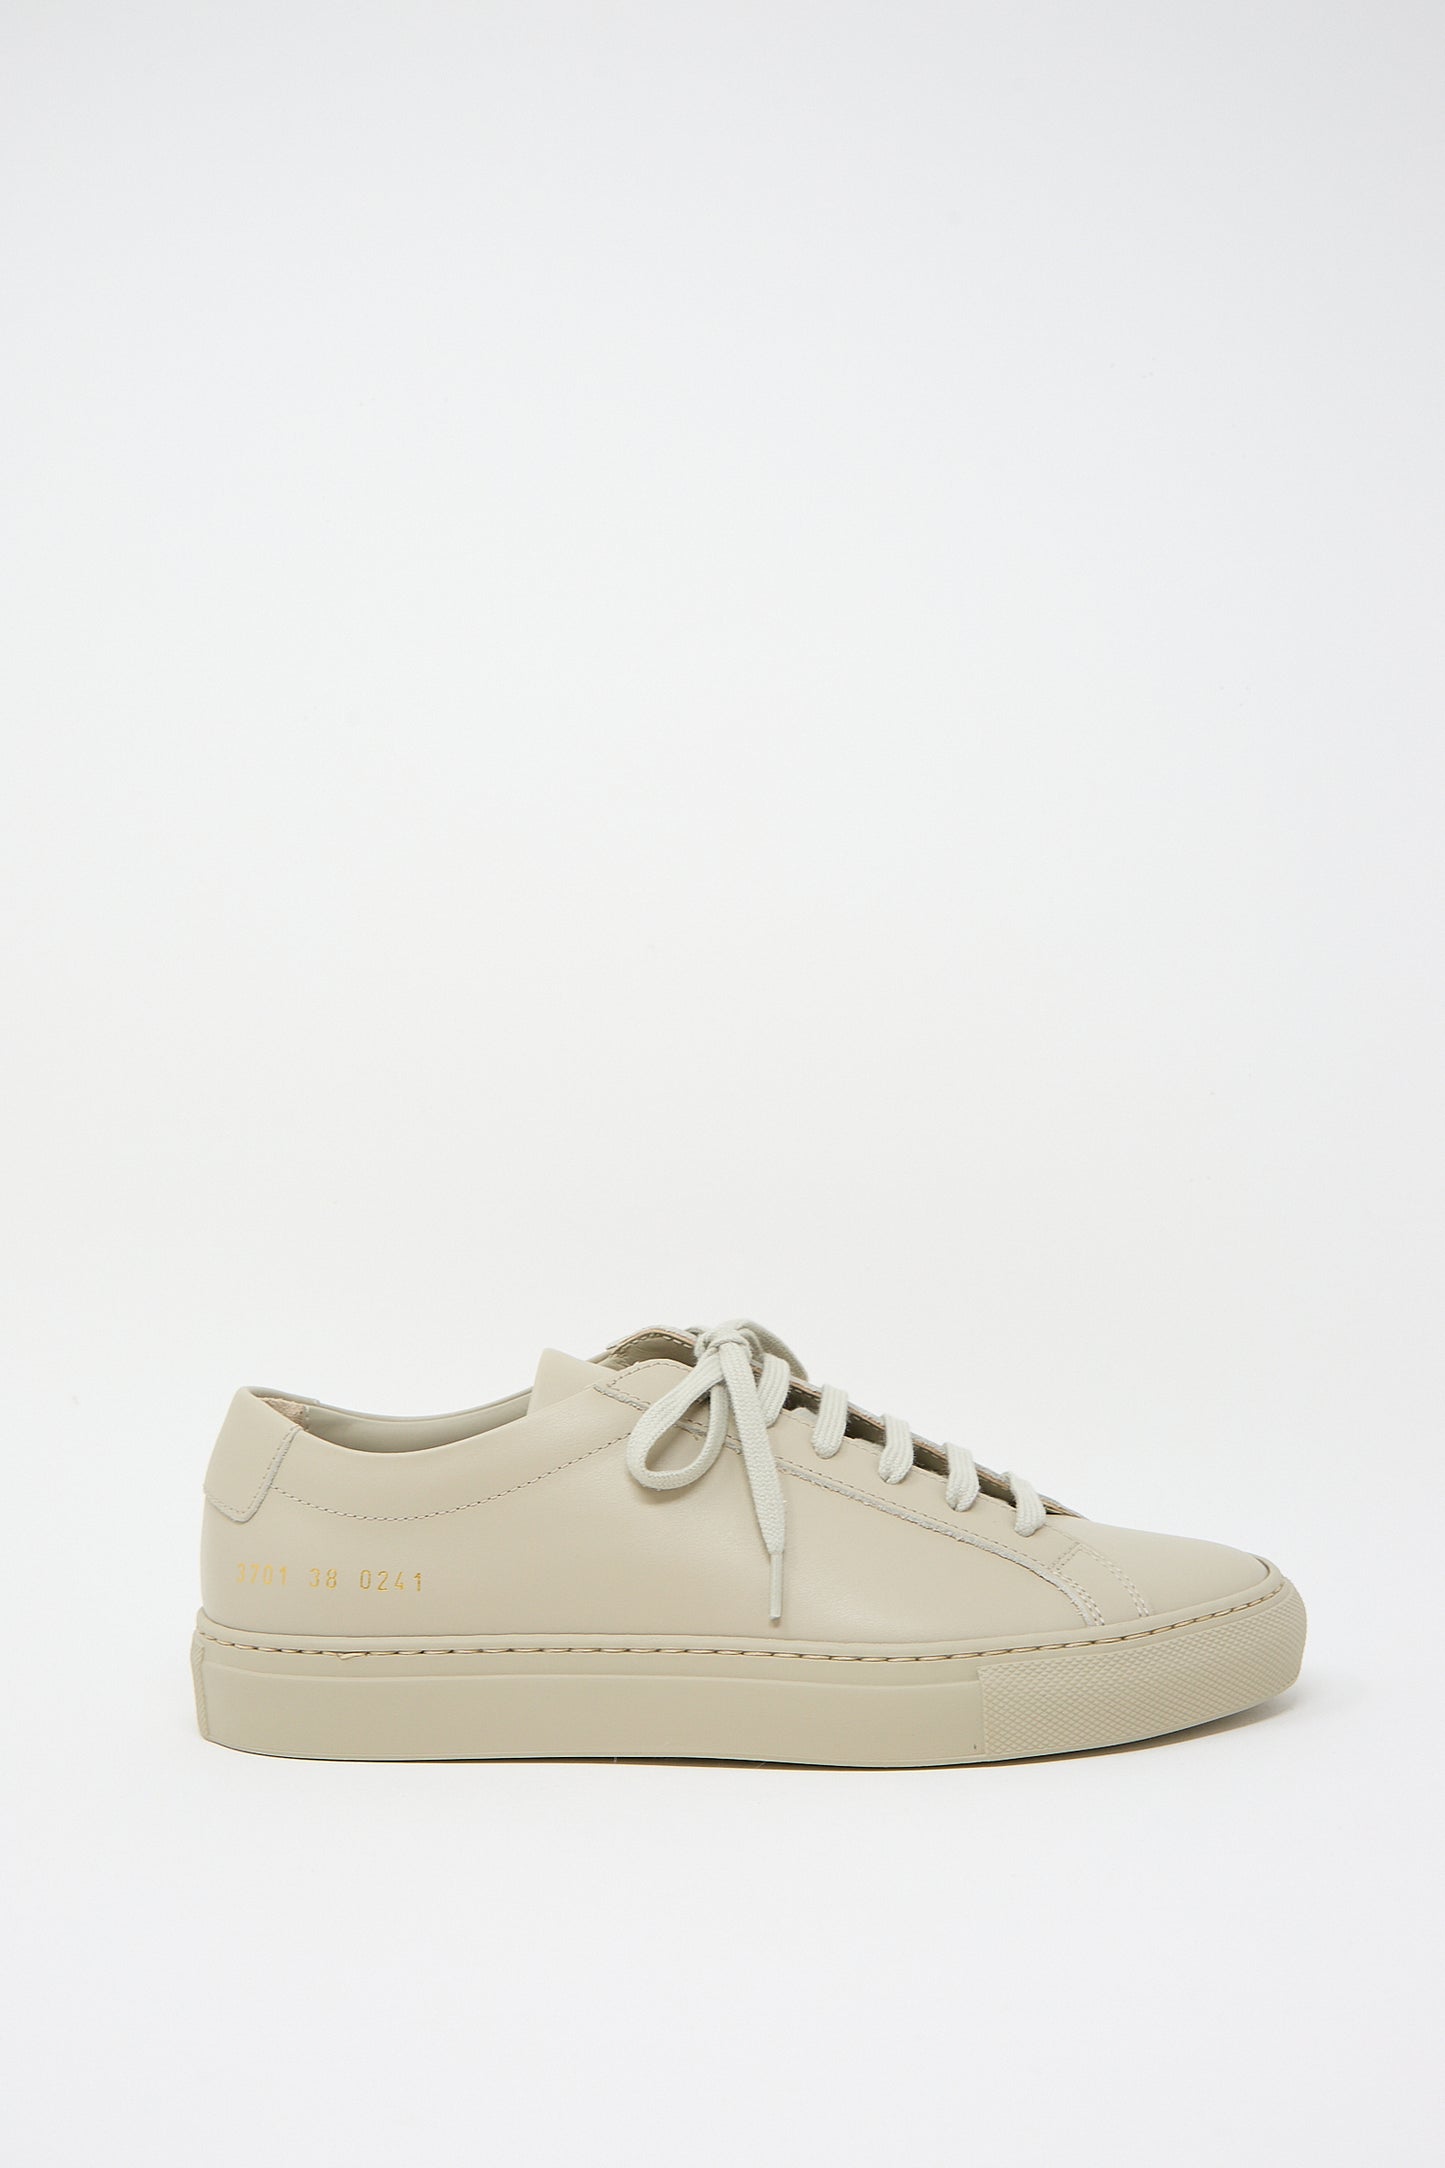 A single taupe Original Achilles Low 3701 sneaker from Common Projects, positioned against a white background.